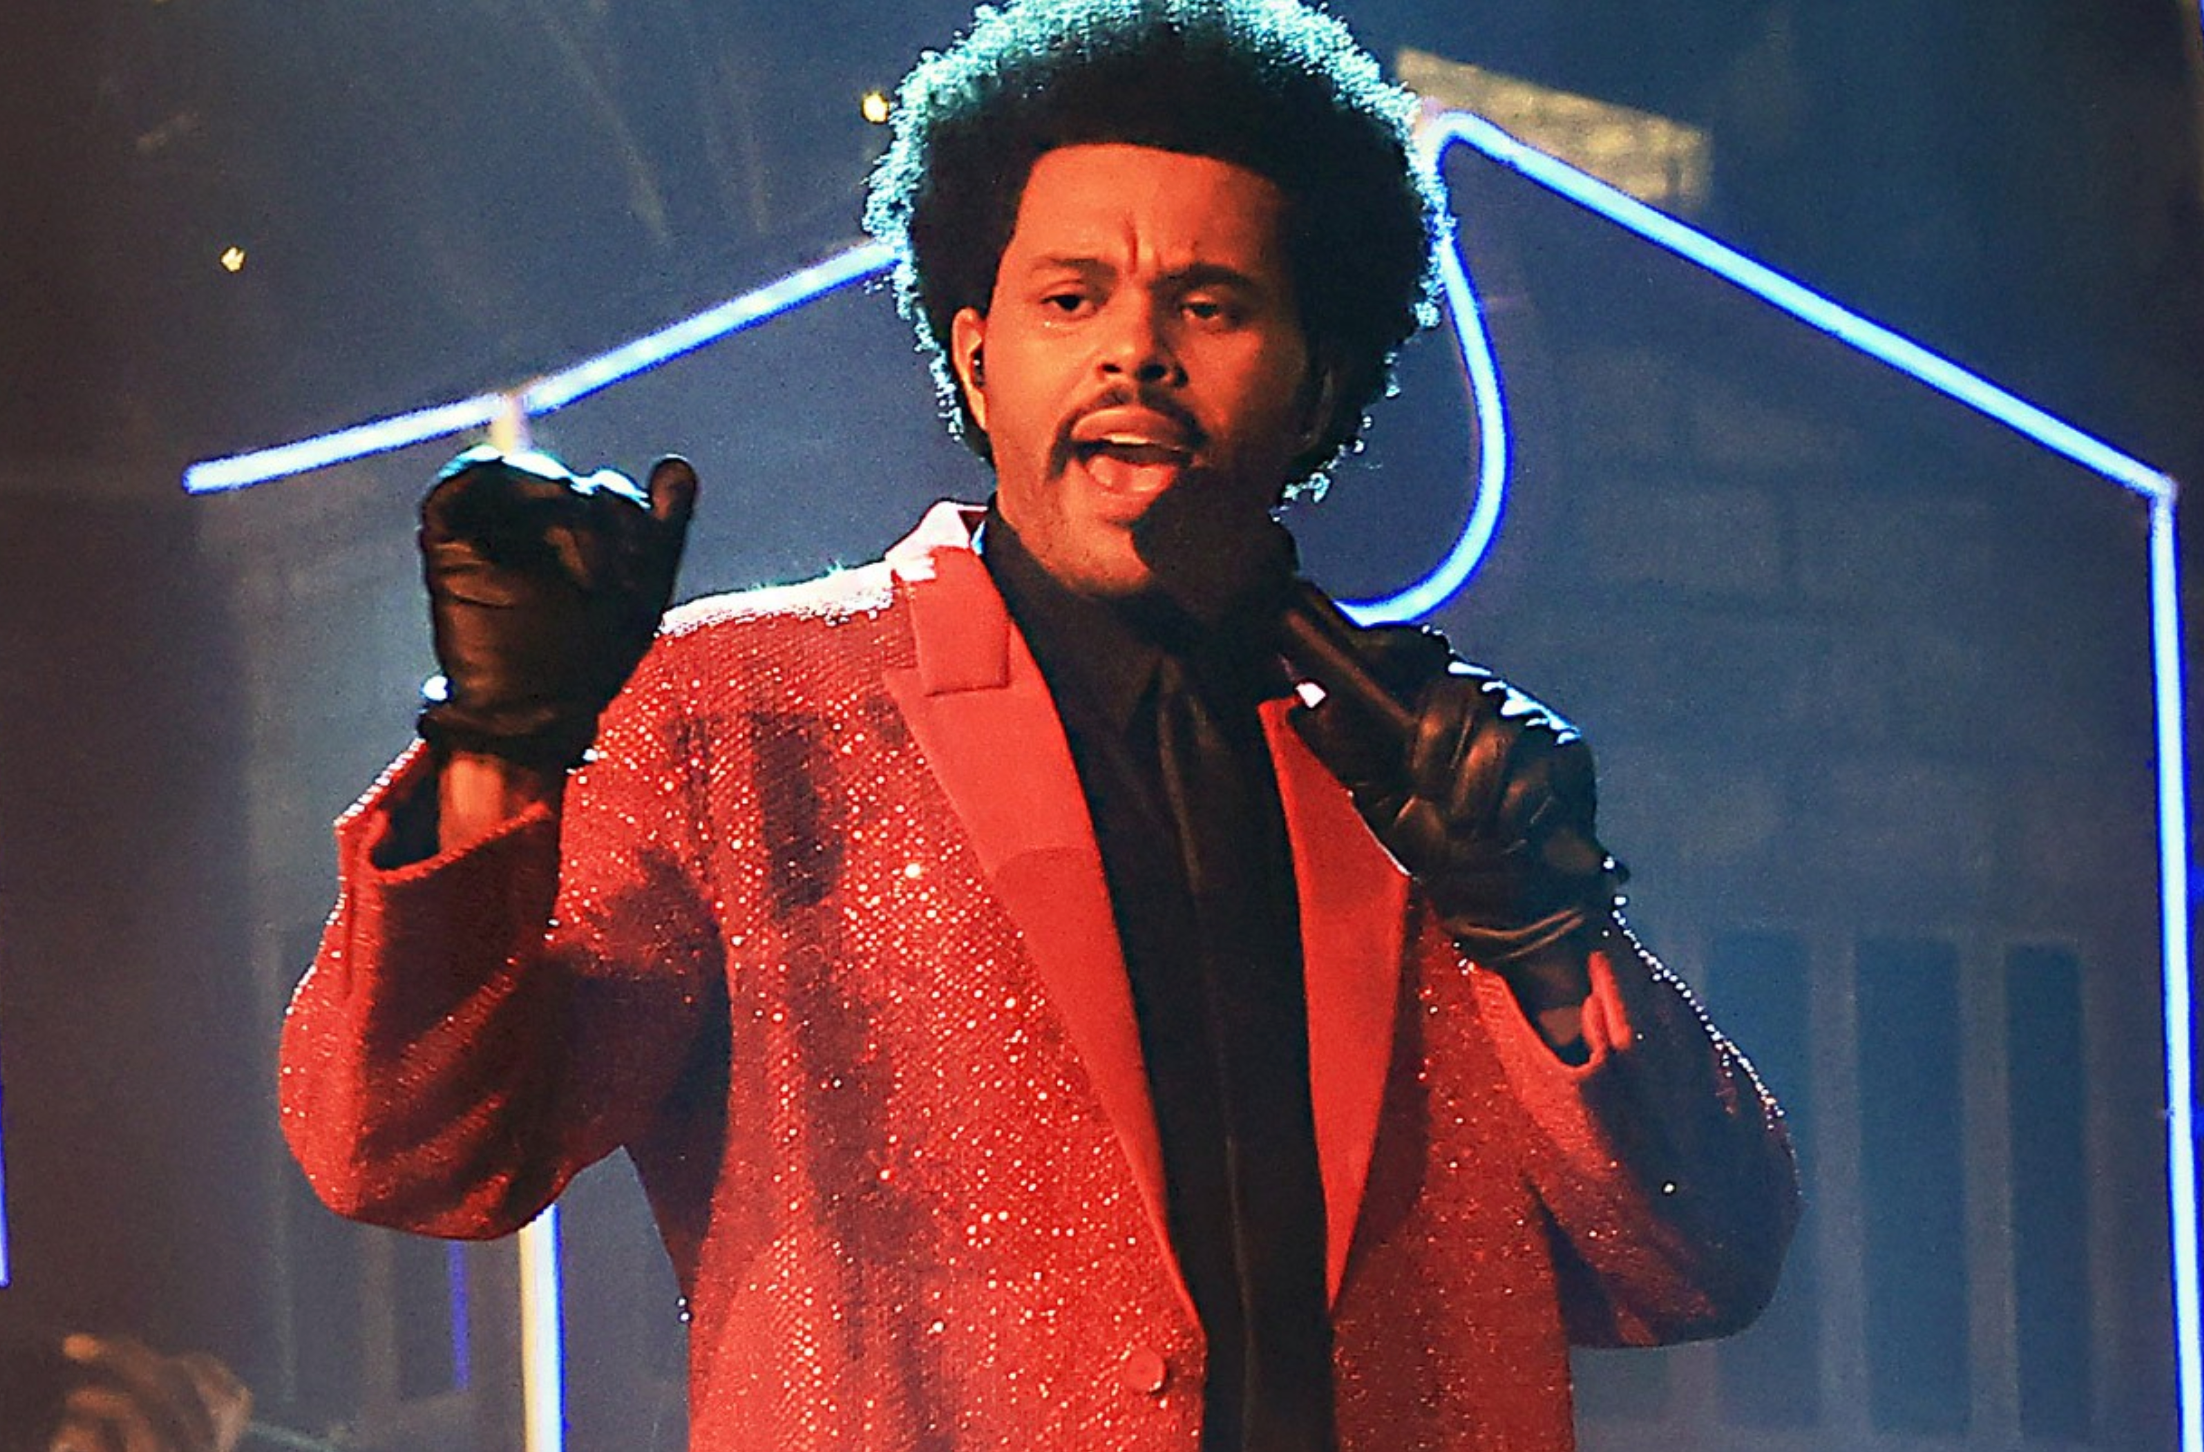 The Weeknd Partners With Binance for First "Crypto-Powered" World Tour